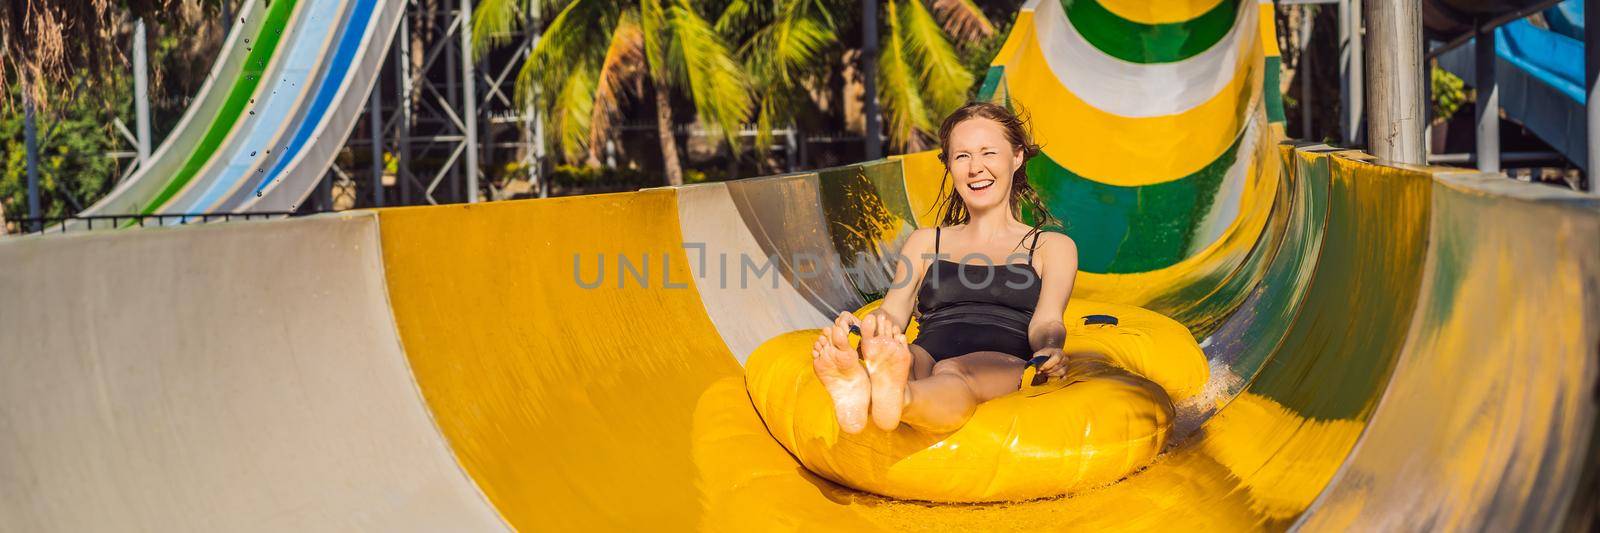 Happy woman going down a water slide. BANNER, LONG FORMAT